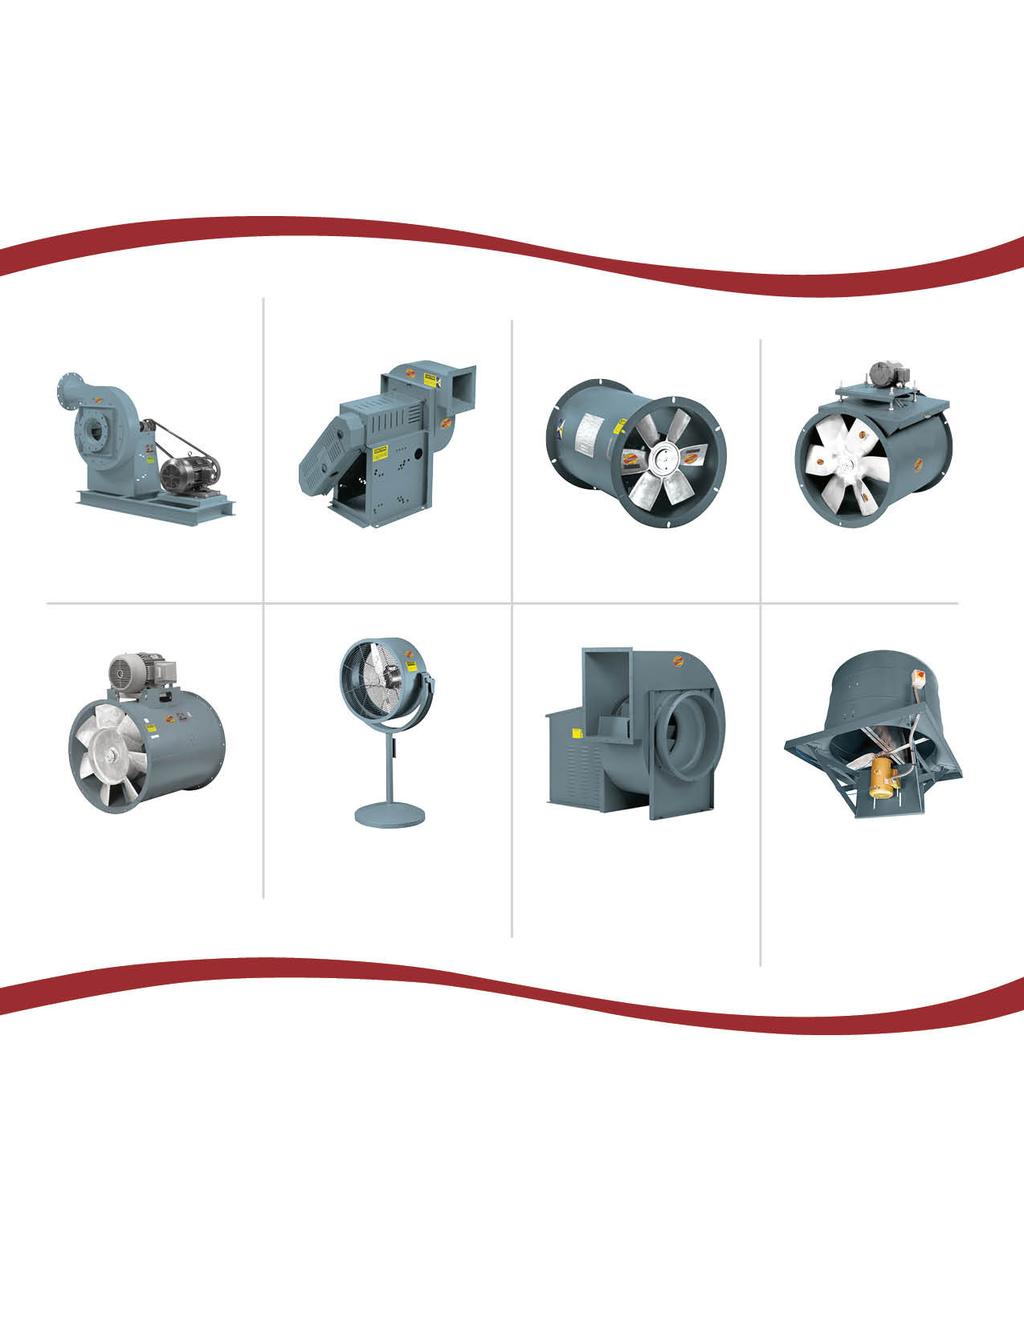 OTHER PRODUCTS INCLUDE: TURBO PRESSURE BLOWERS INDUSTRIAL EXHAUSTERS DUCT FANS DUCT AXIAL FANS VANEAXIAL BLOWERS COOL BLAST & UTILITY FANS STEEL CENTRIFUGAL BLOWERS PROP FANS & ROOF VENTILATORS More